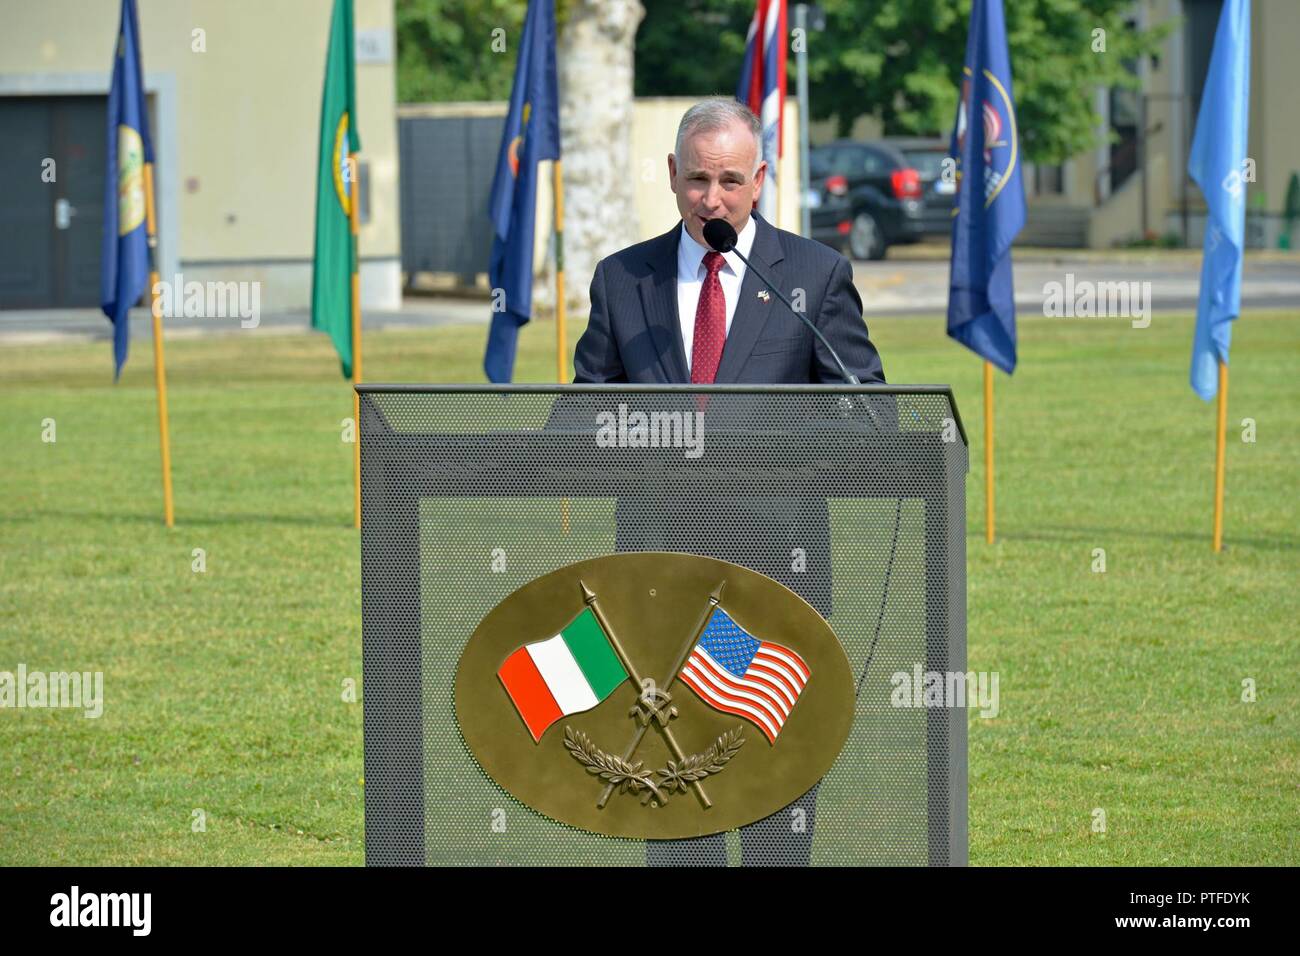 Michael D. Formica, Region Director, Installation Management Command-Europe, addresses the audience during the garrison change of command ceremony on Hoekstra Field, Caserma Ederle, Vicenza, Italy, Jul. 21, 2017. Stock Photo